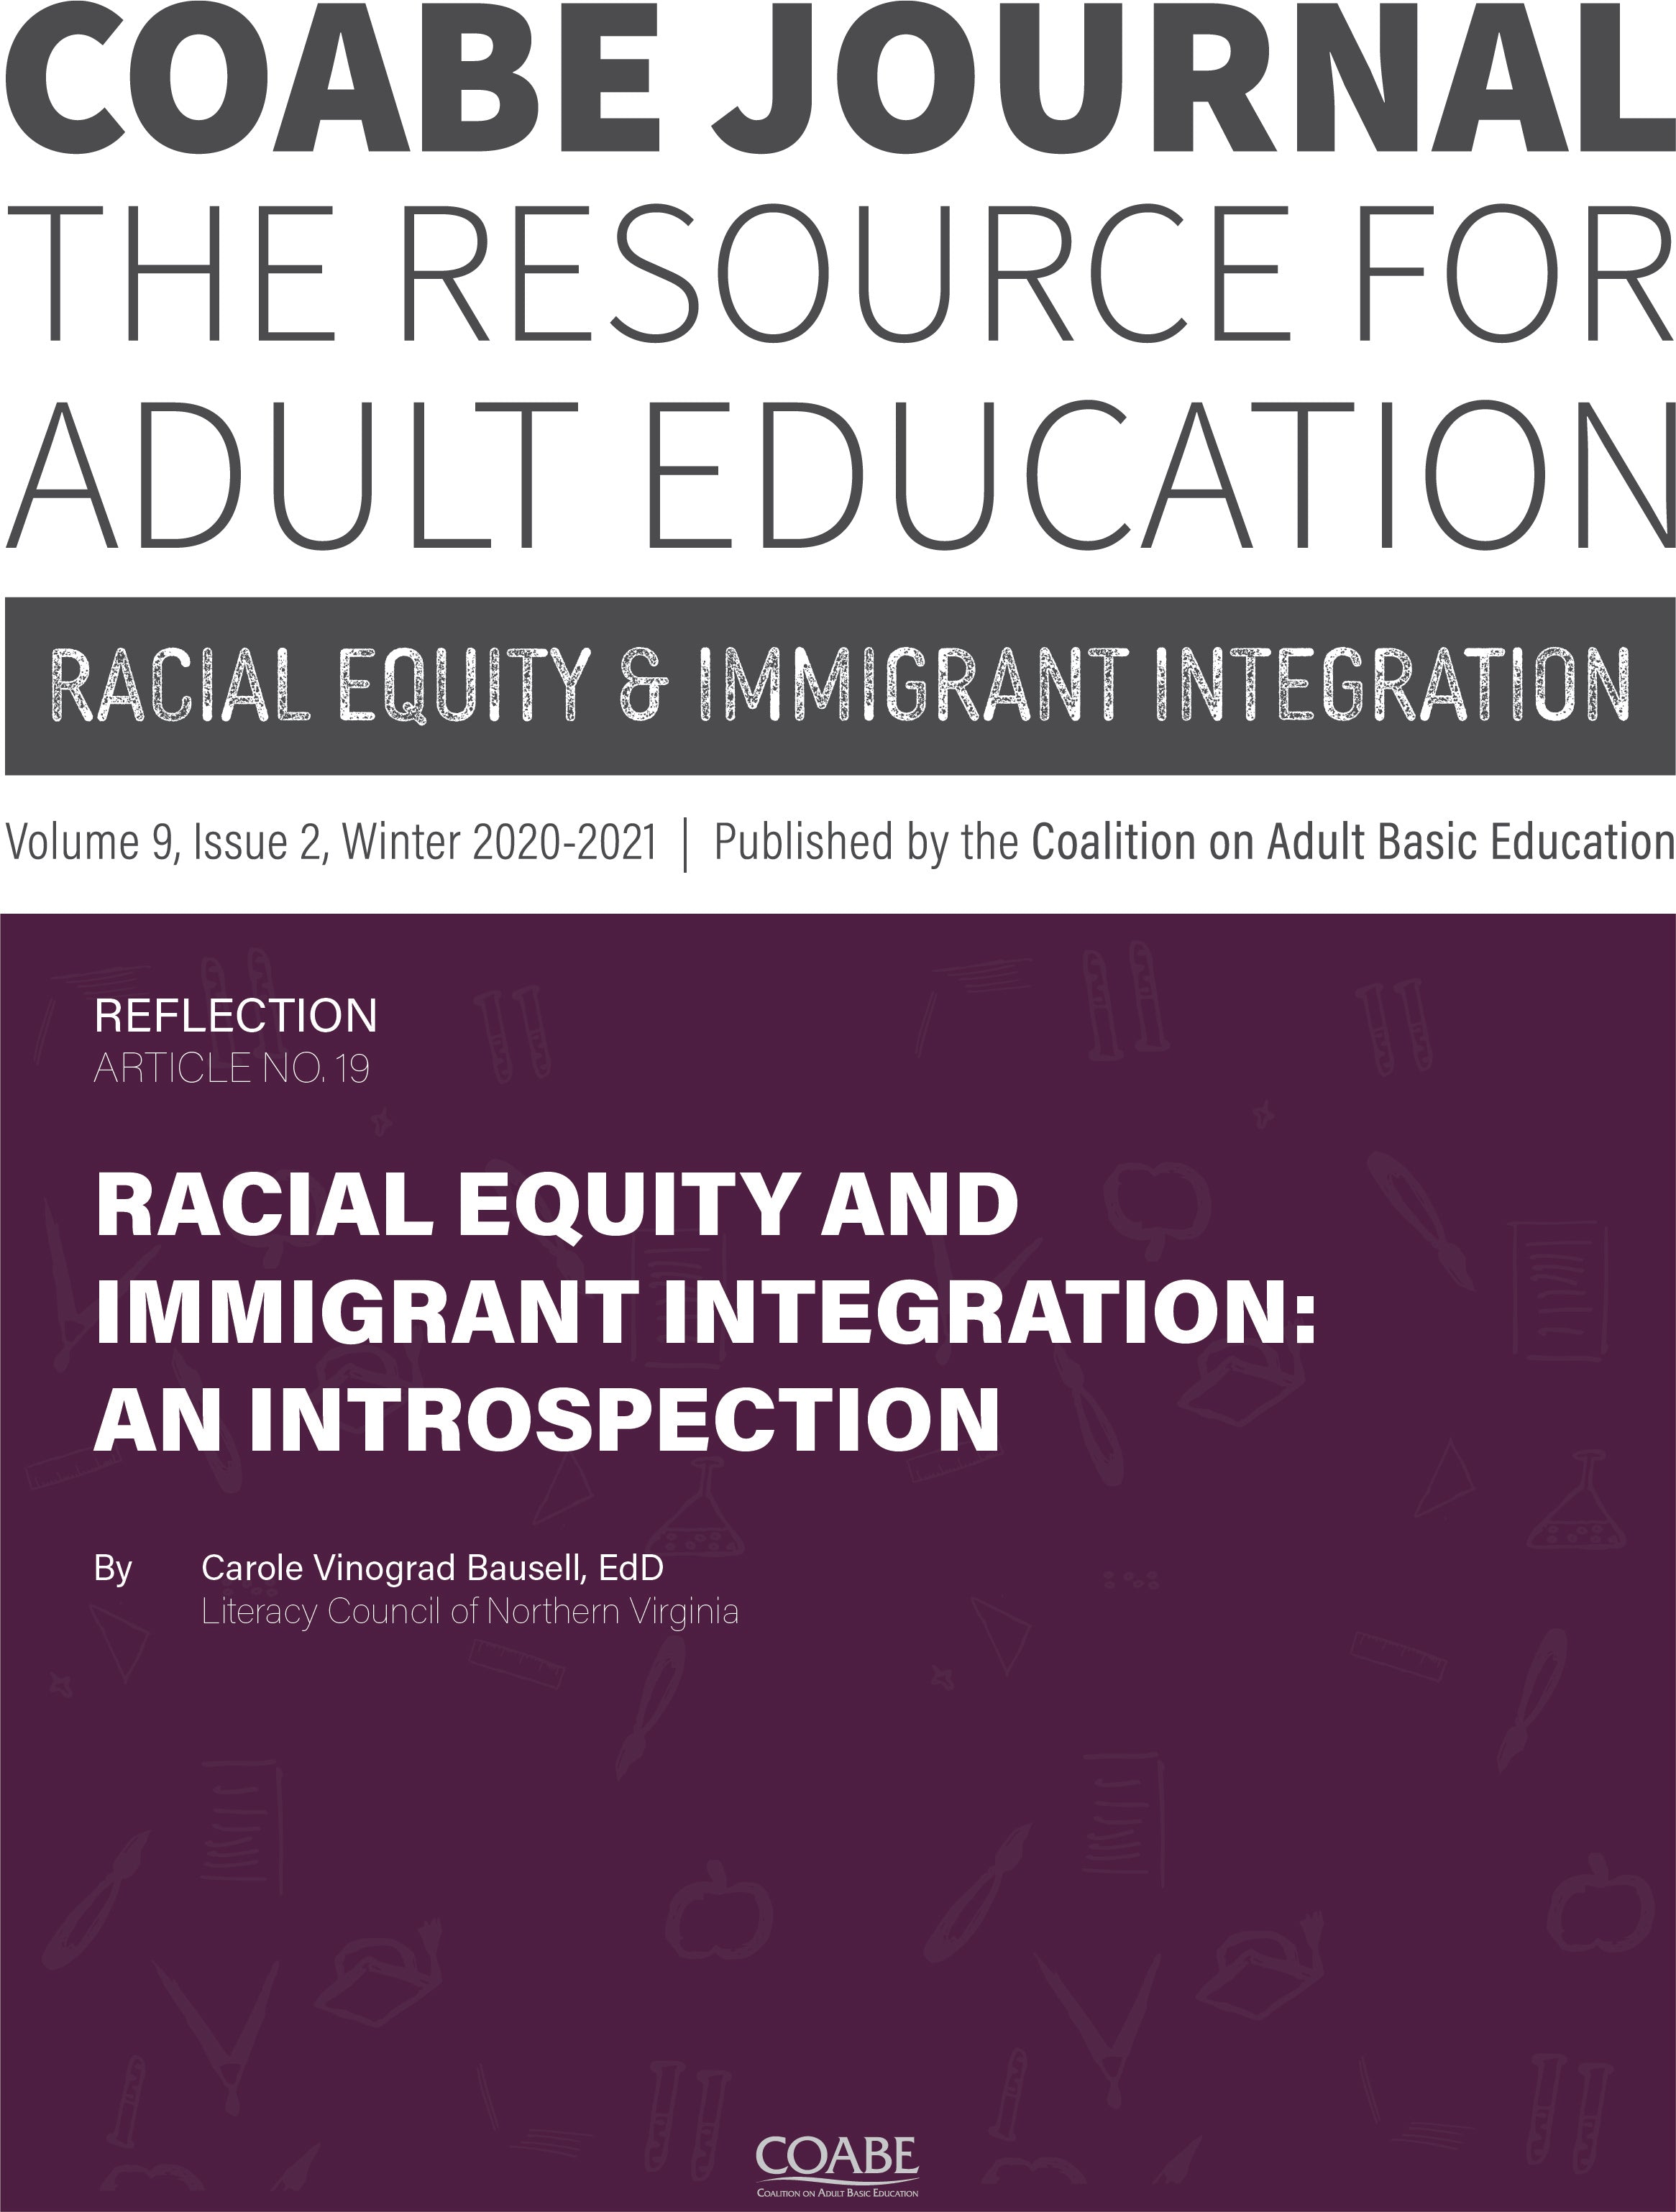 Article 19 / Racial Equity & Immigrant Integration: An Introspection